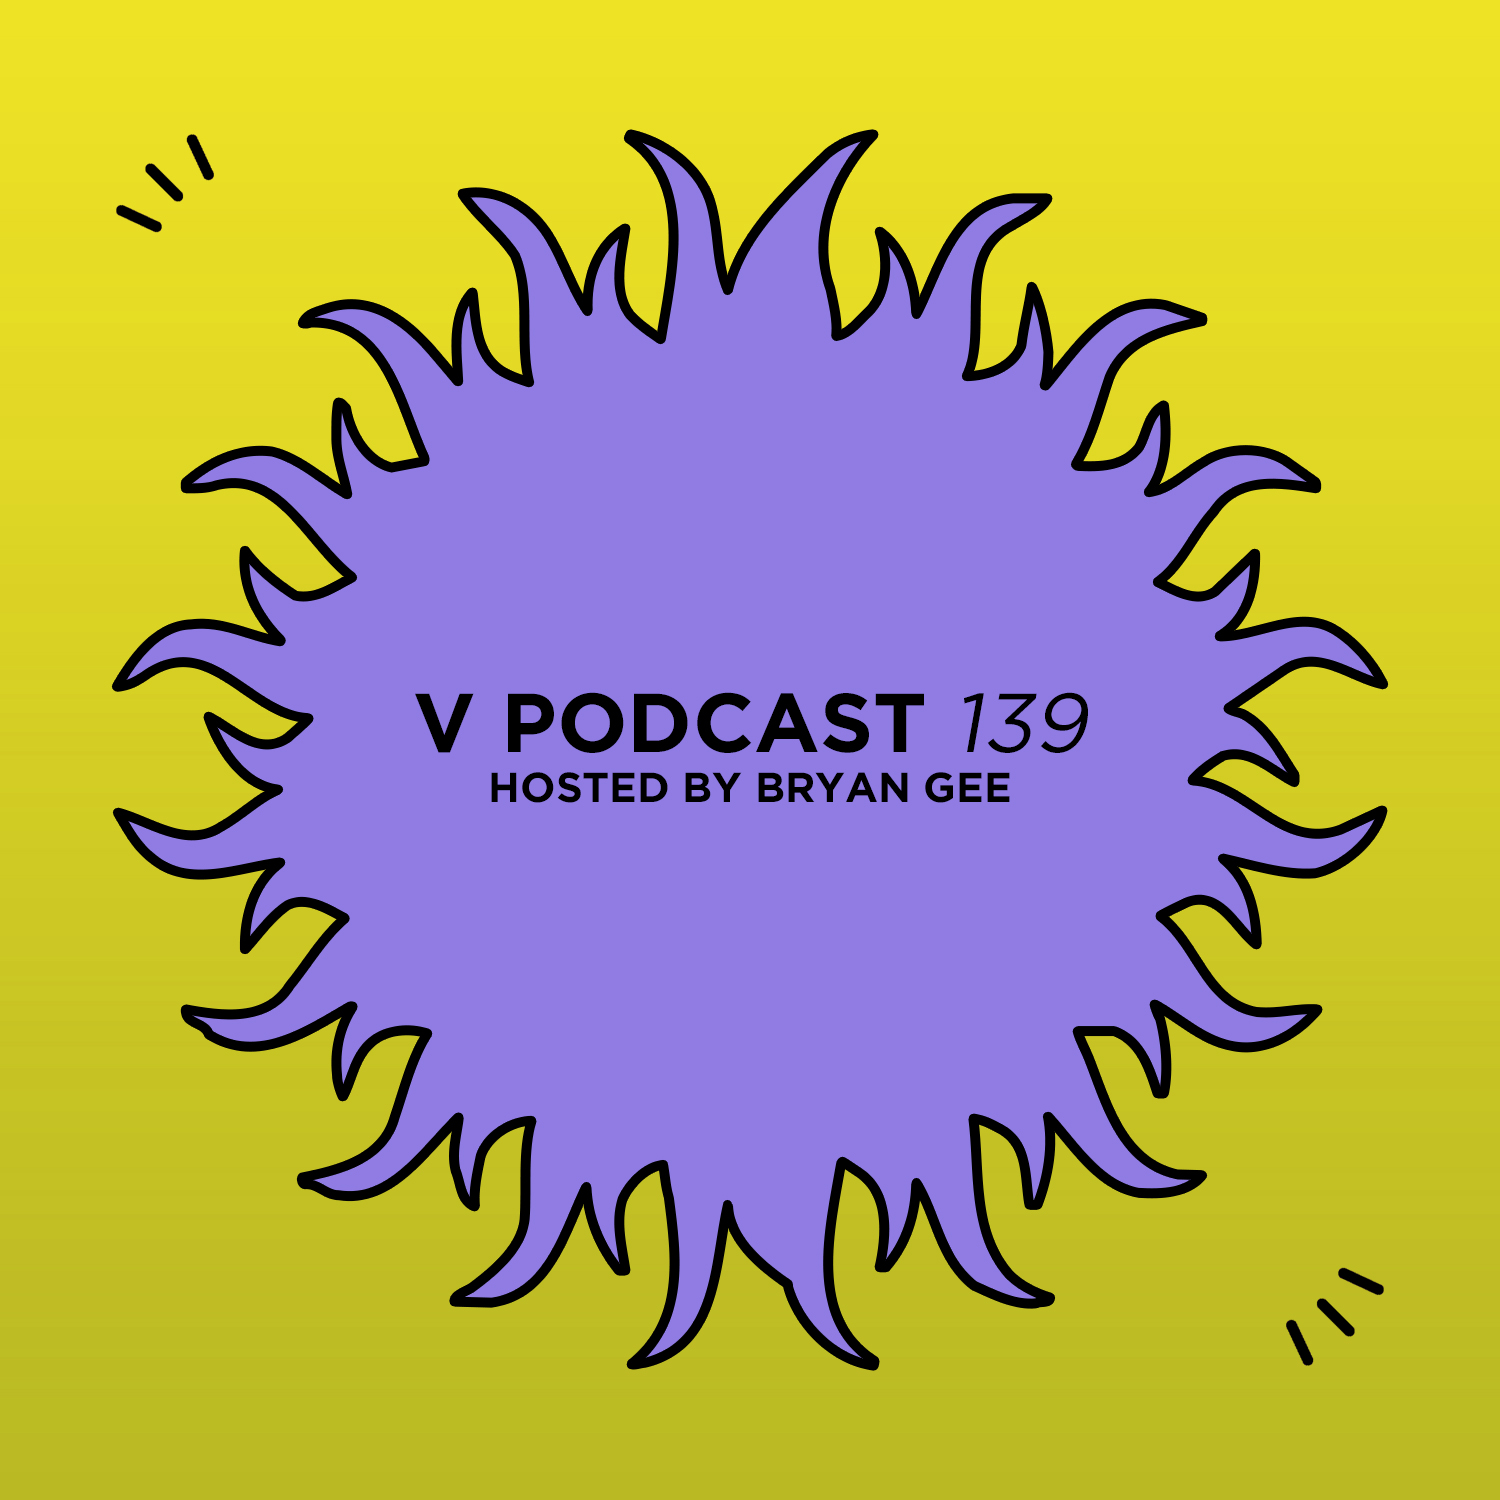 V Podcast 139 - Hosted by Bryan Gee Artwork